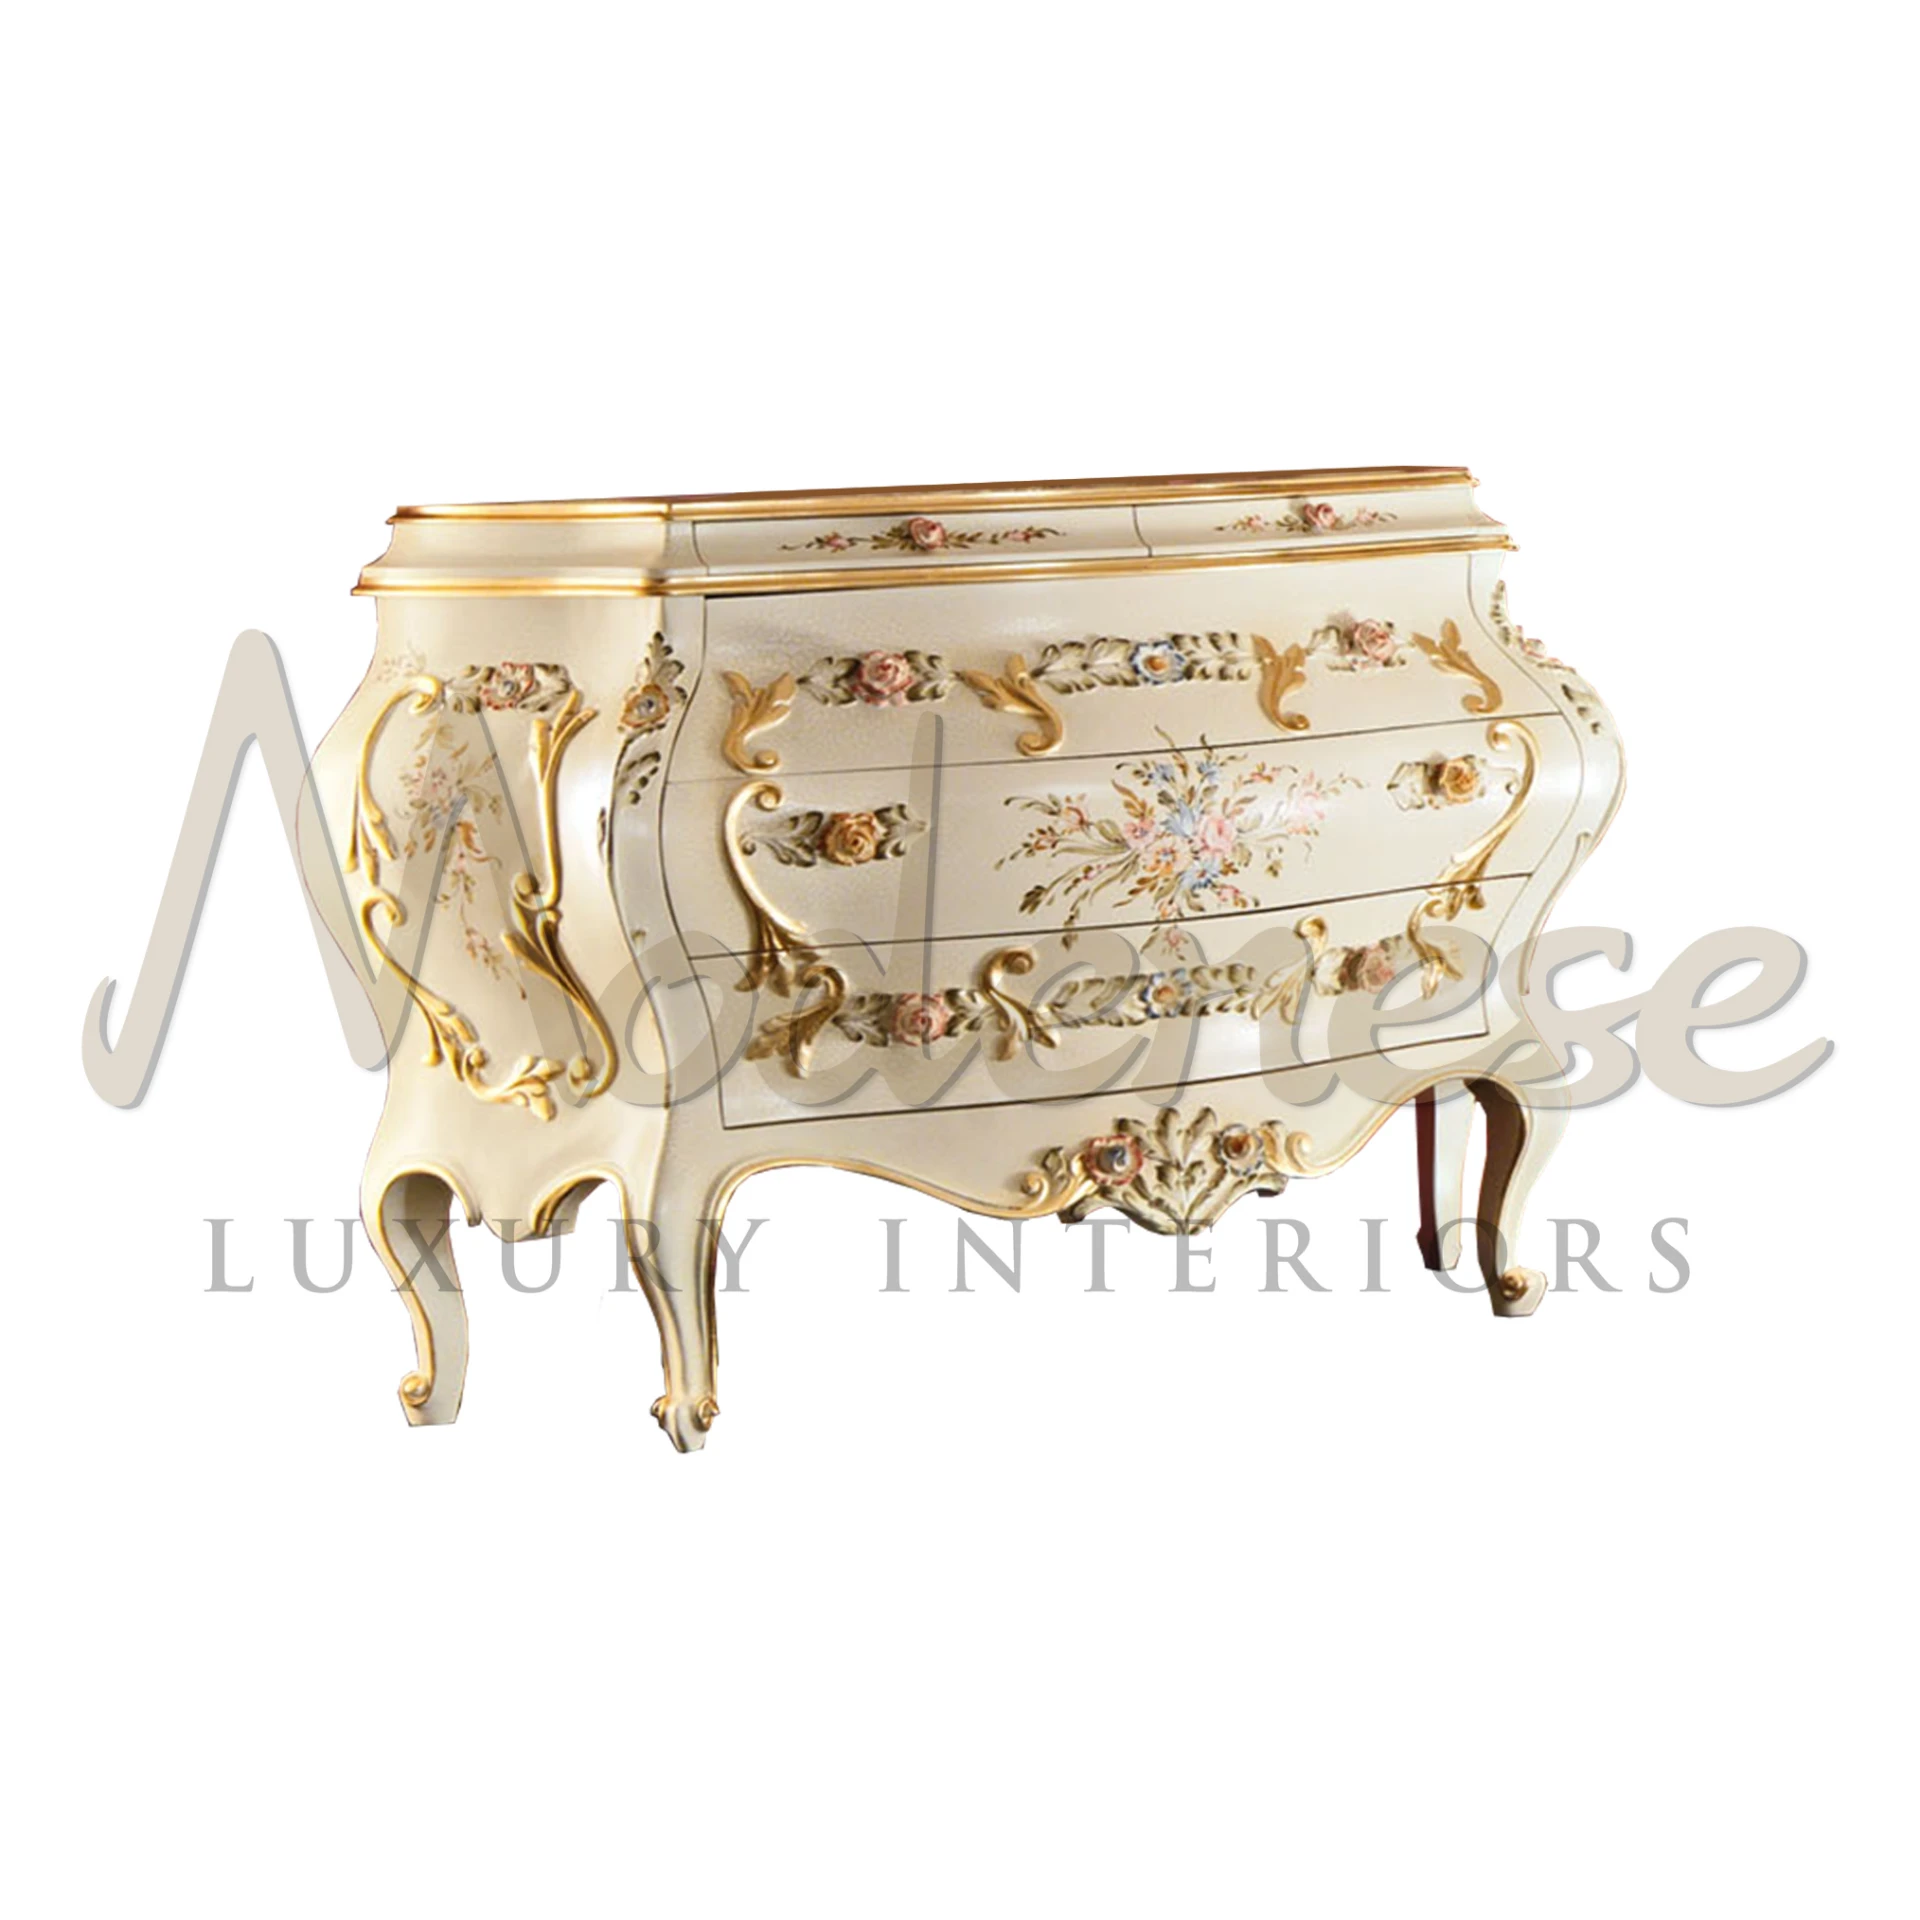  Luxurious curved chest with ornate gold detailing and pastel floral embellishments by Italian artisans at Modenese Furniture                             